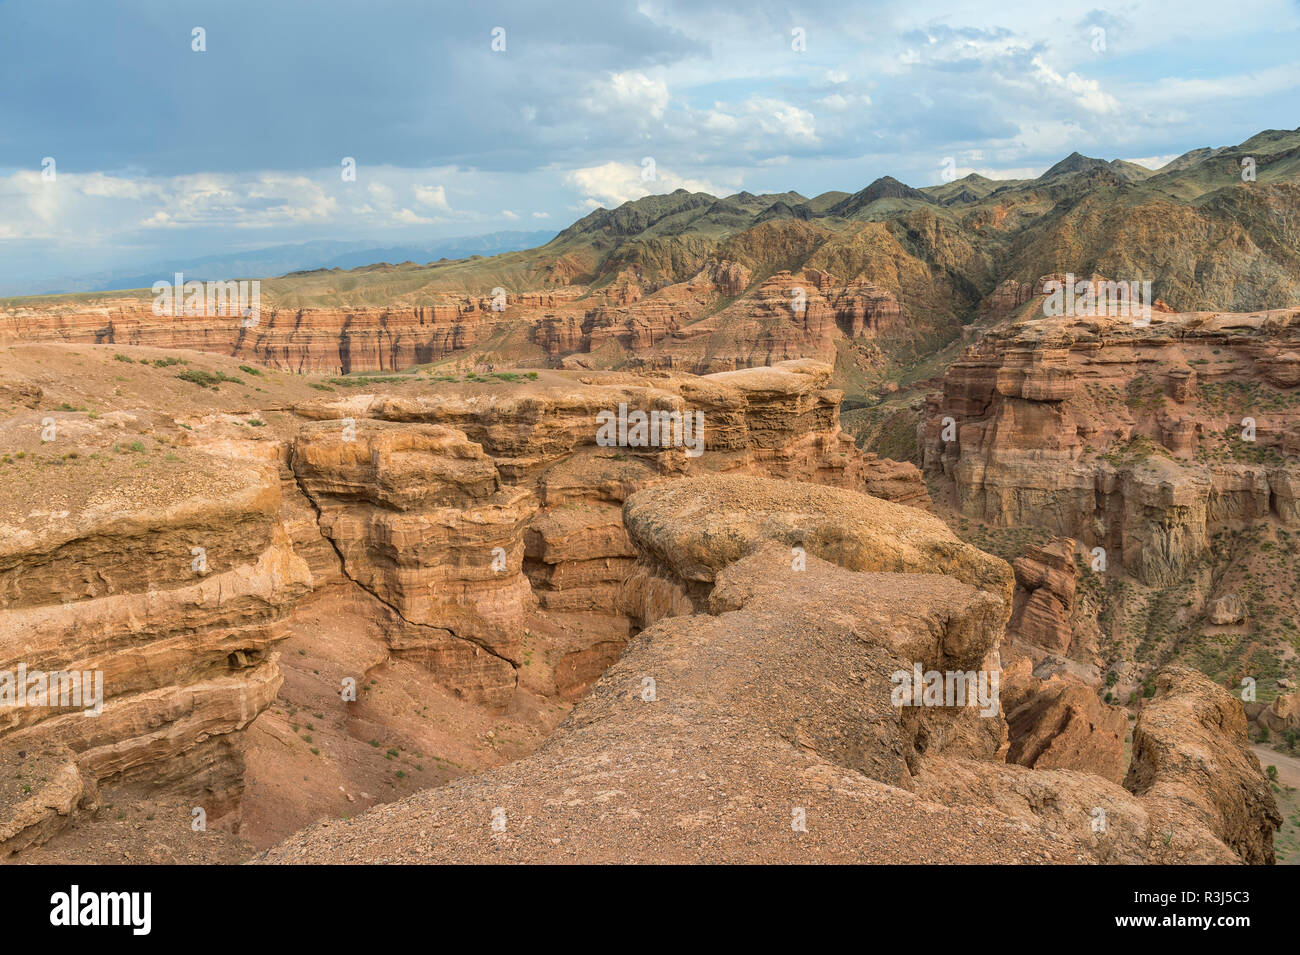 Valley of Castles, Sharyn Canyon National Park, Tien Shan Mountains, Kazakhstan Stock Photo